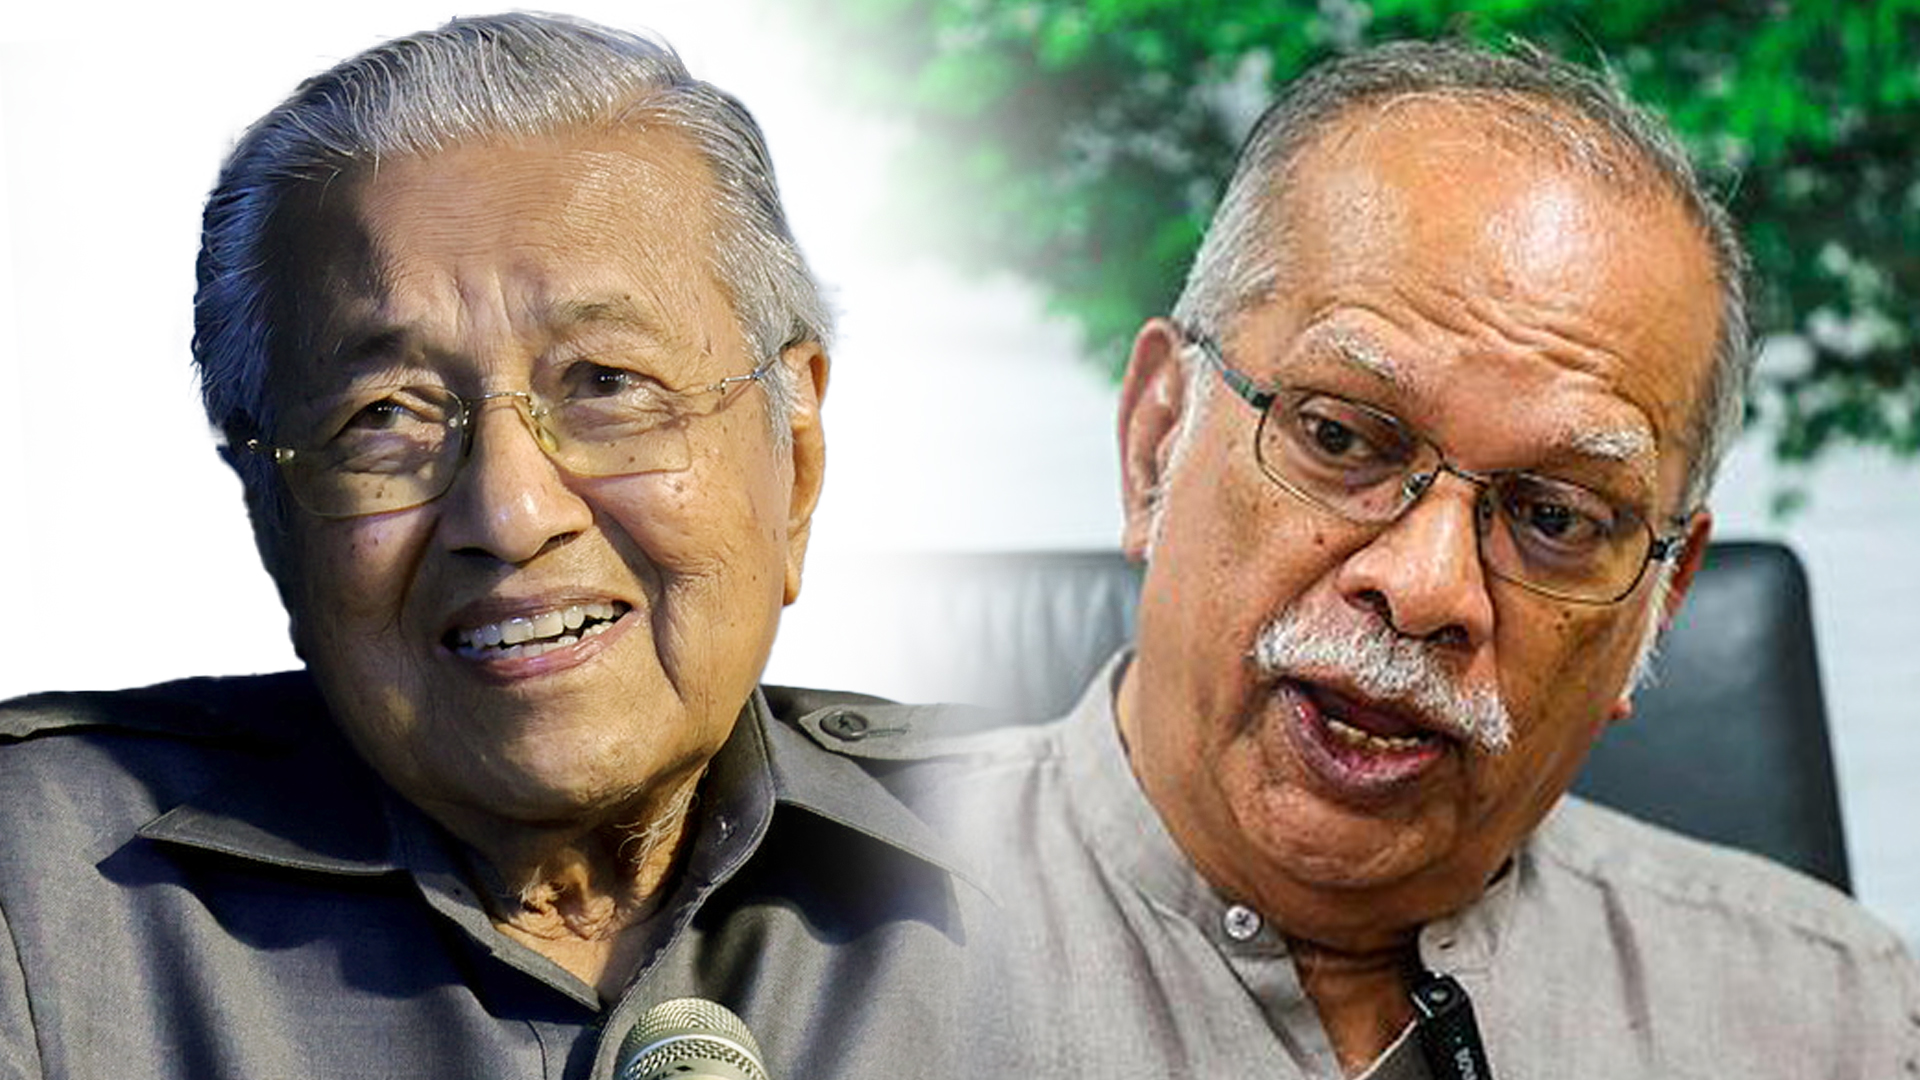 You formed an Indian-based party: Tun M fires back at Ramasamy's racism claims